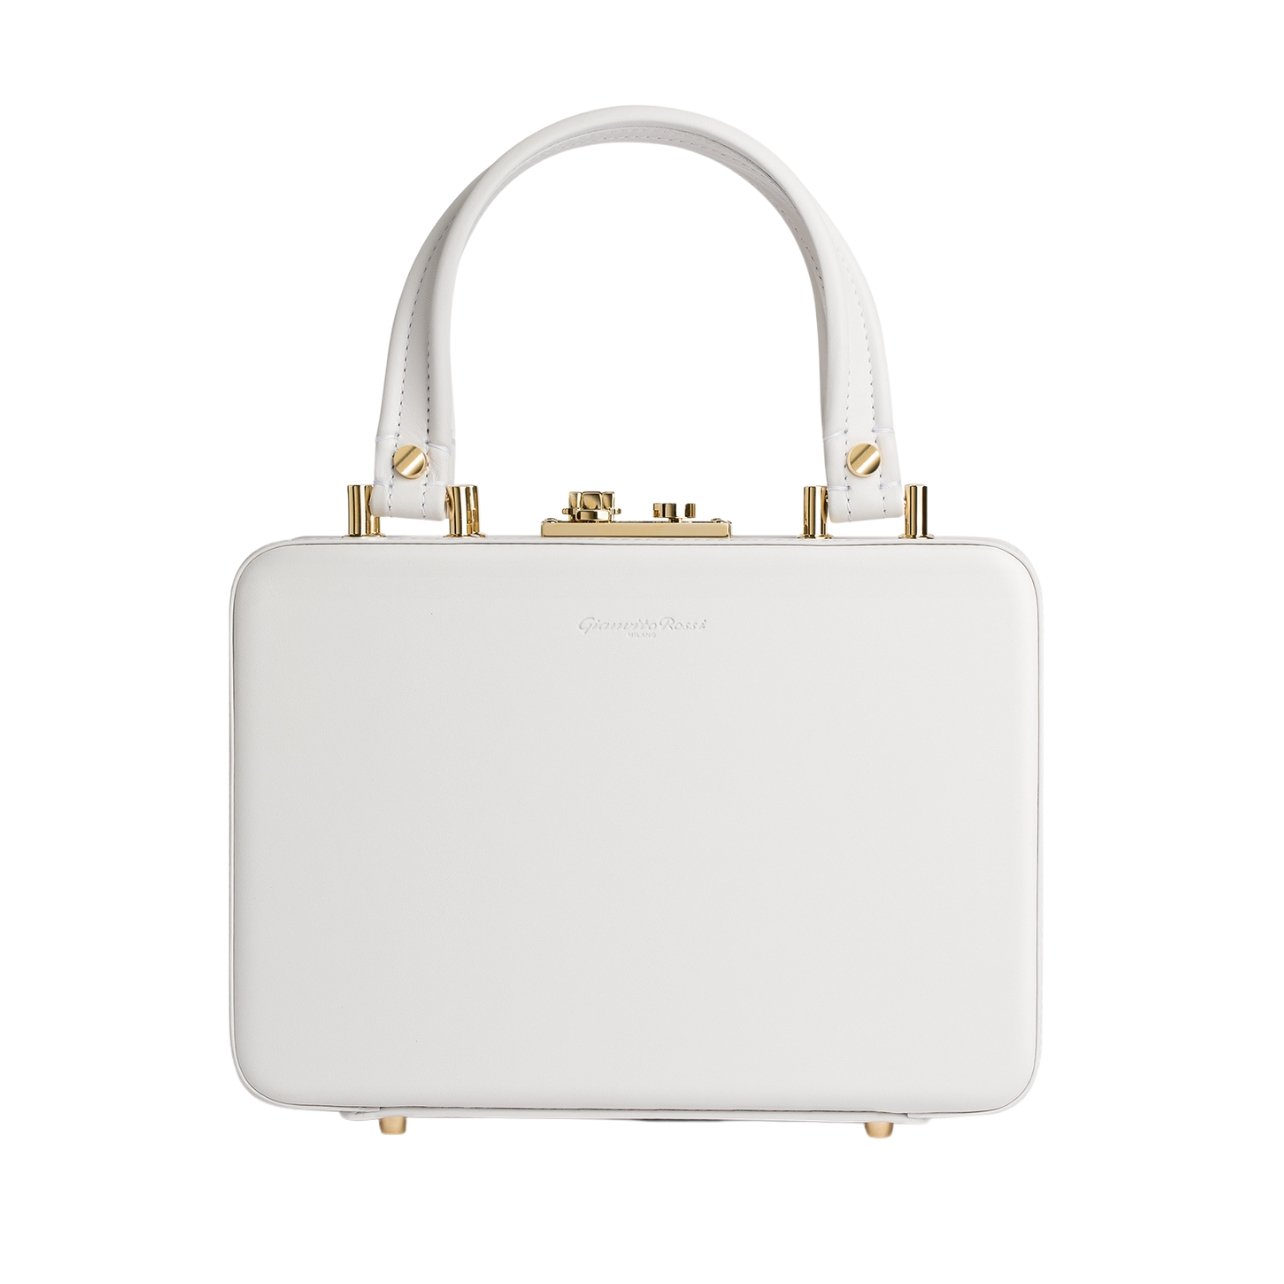 Gianvito Rossi’s leather box top-handle Valì bag in white